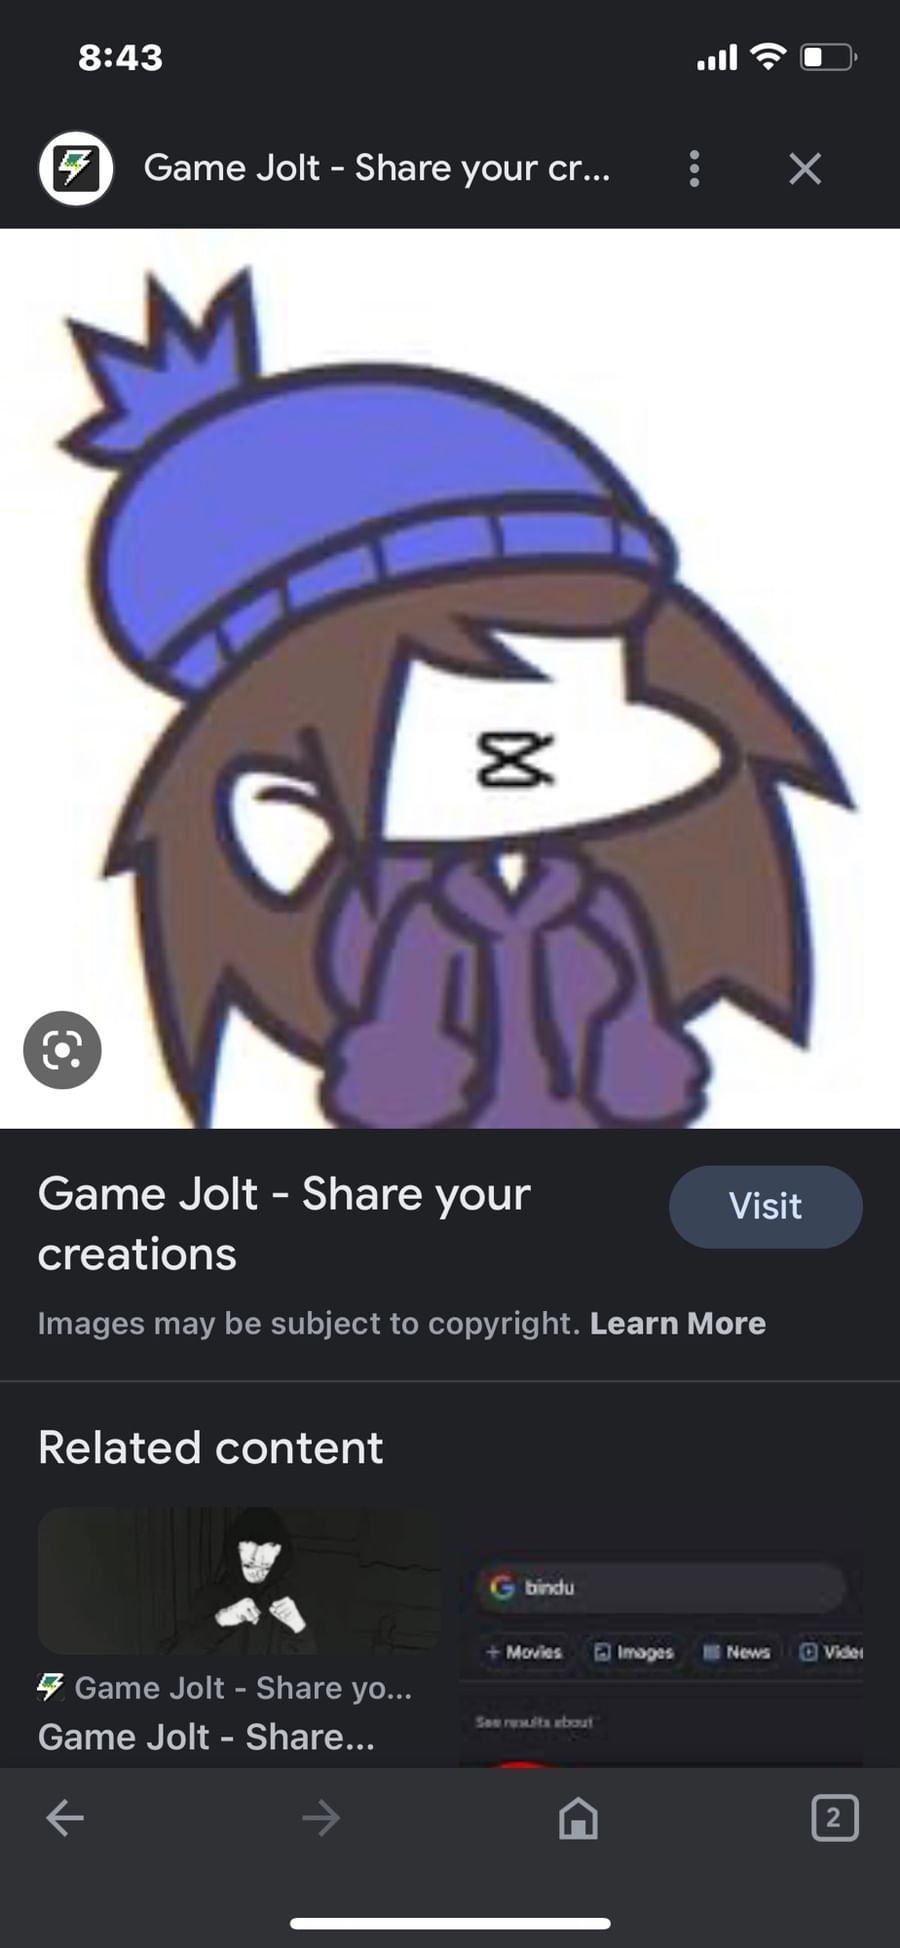 Share your creations - Game Jolt